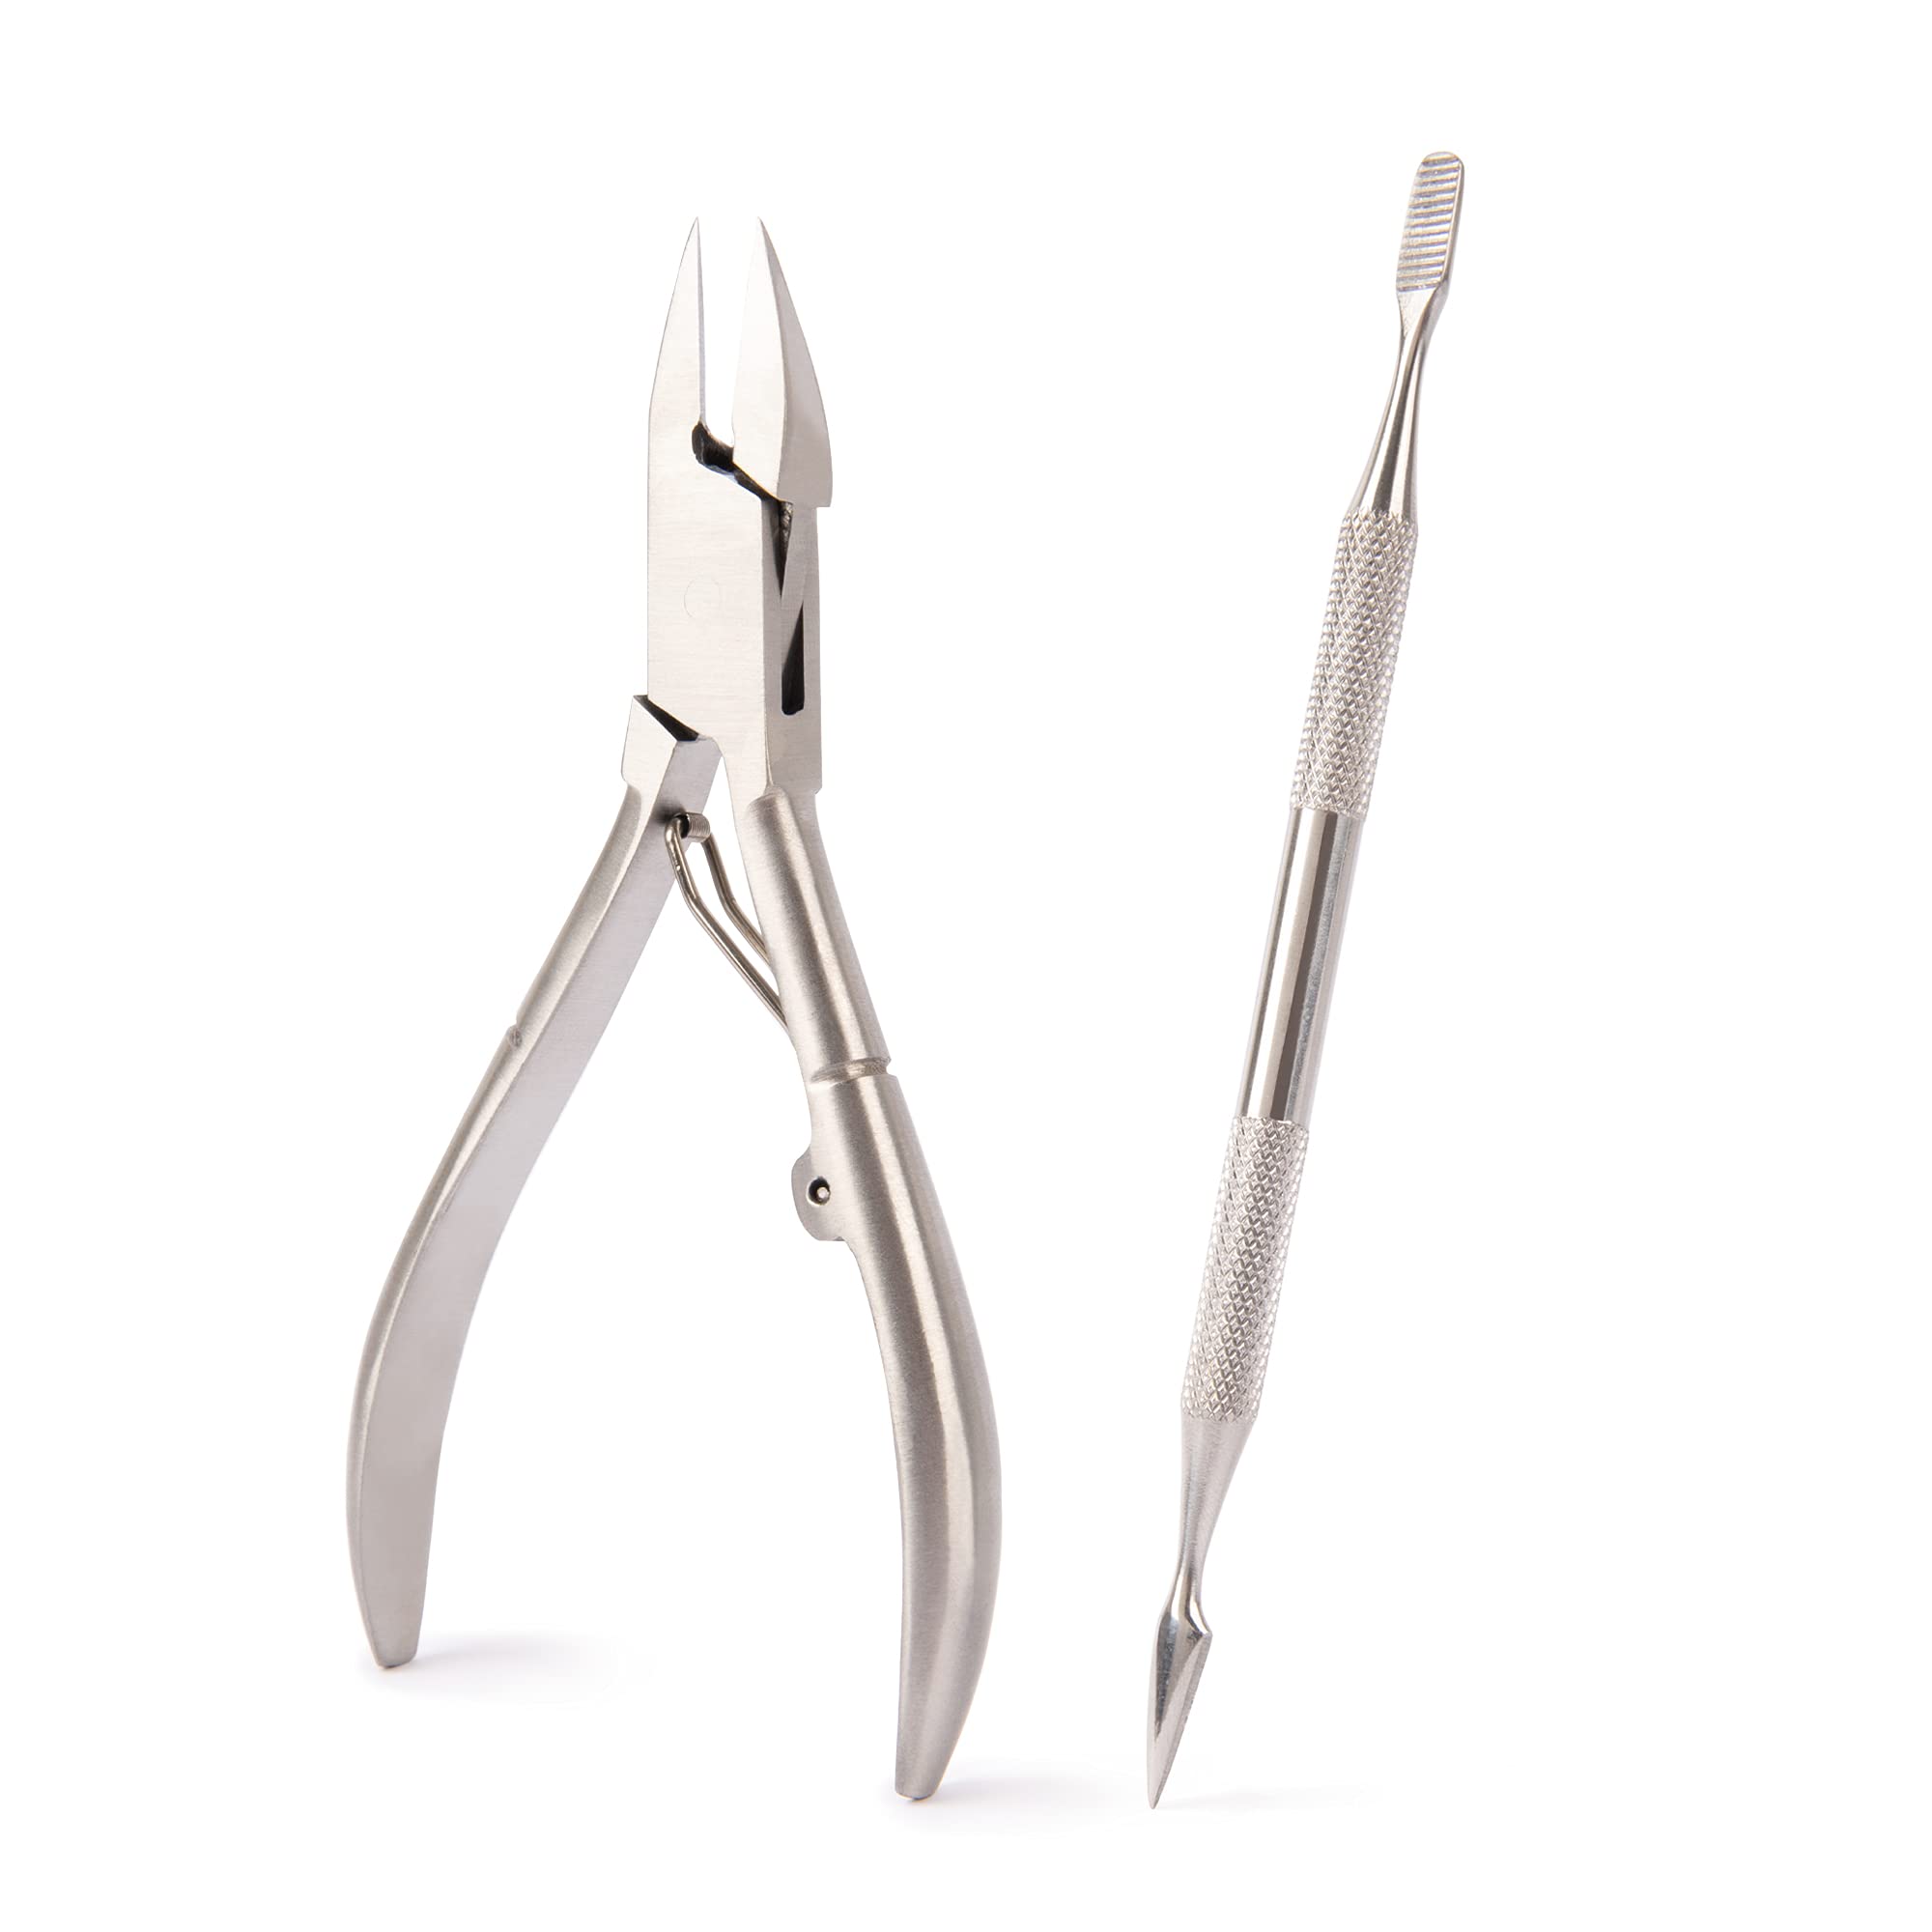 TRIM Simply Foot Ingrown Toenail Kit – Includes Stainless Steel Toenail Nipper and Stainless Steel Dual-Ended File – Easy to Use Foot Care Tools – for Men and Women – Silver – 2 Piece Set